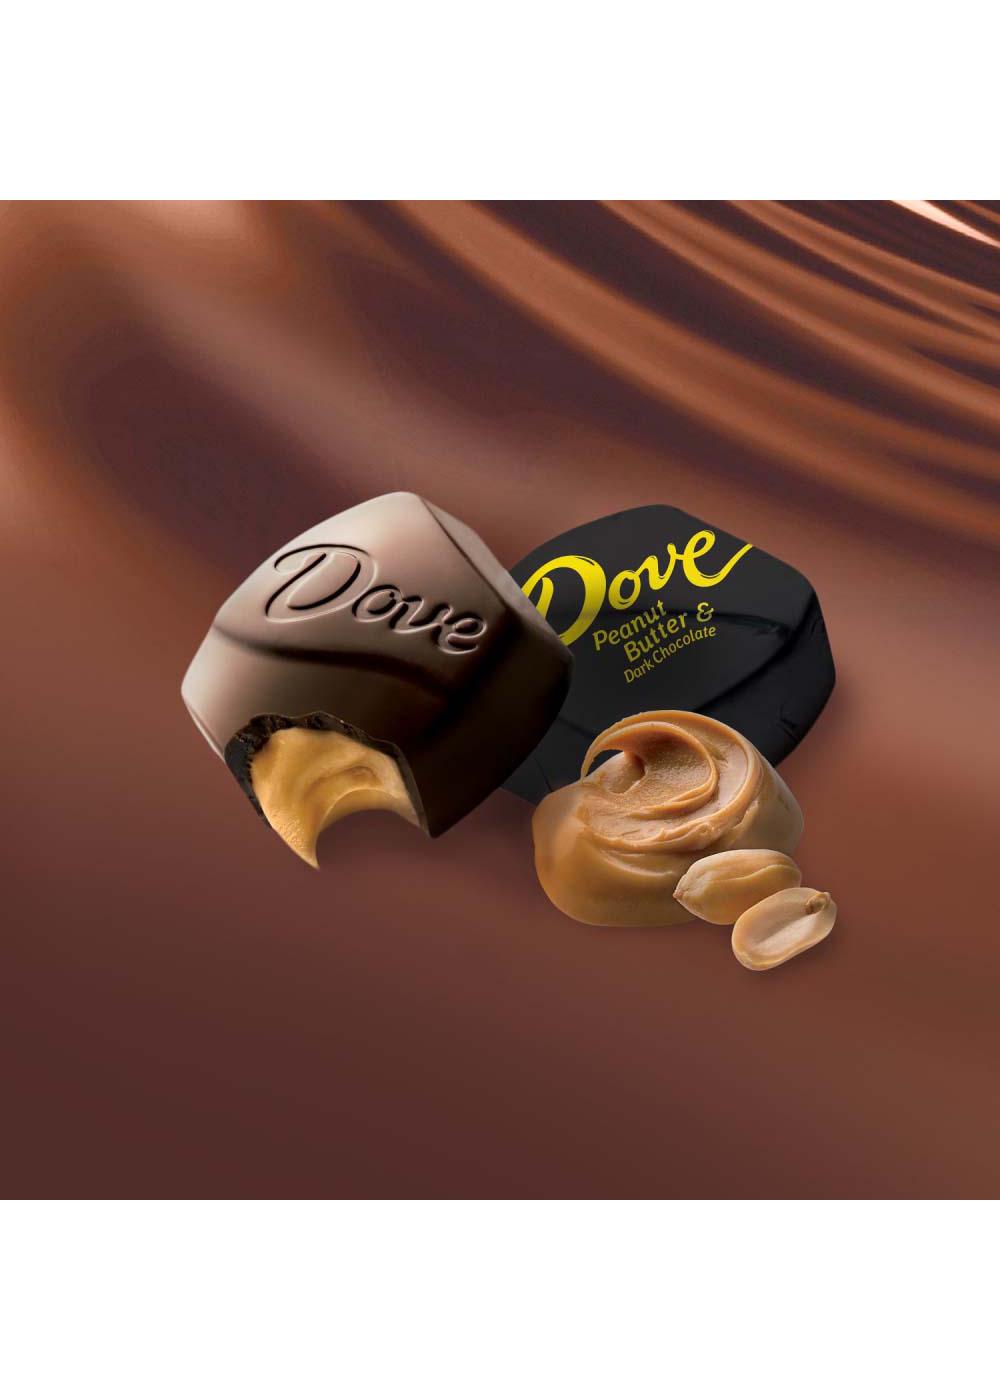 Dove Promises Dark Chocolate & Peanut Butter Candy; image 6 of 7